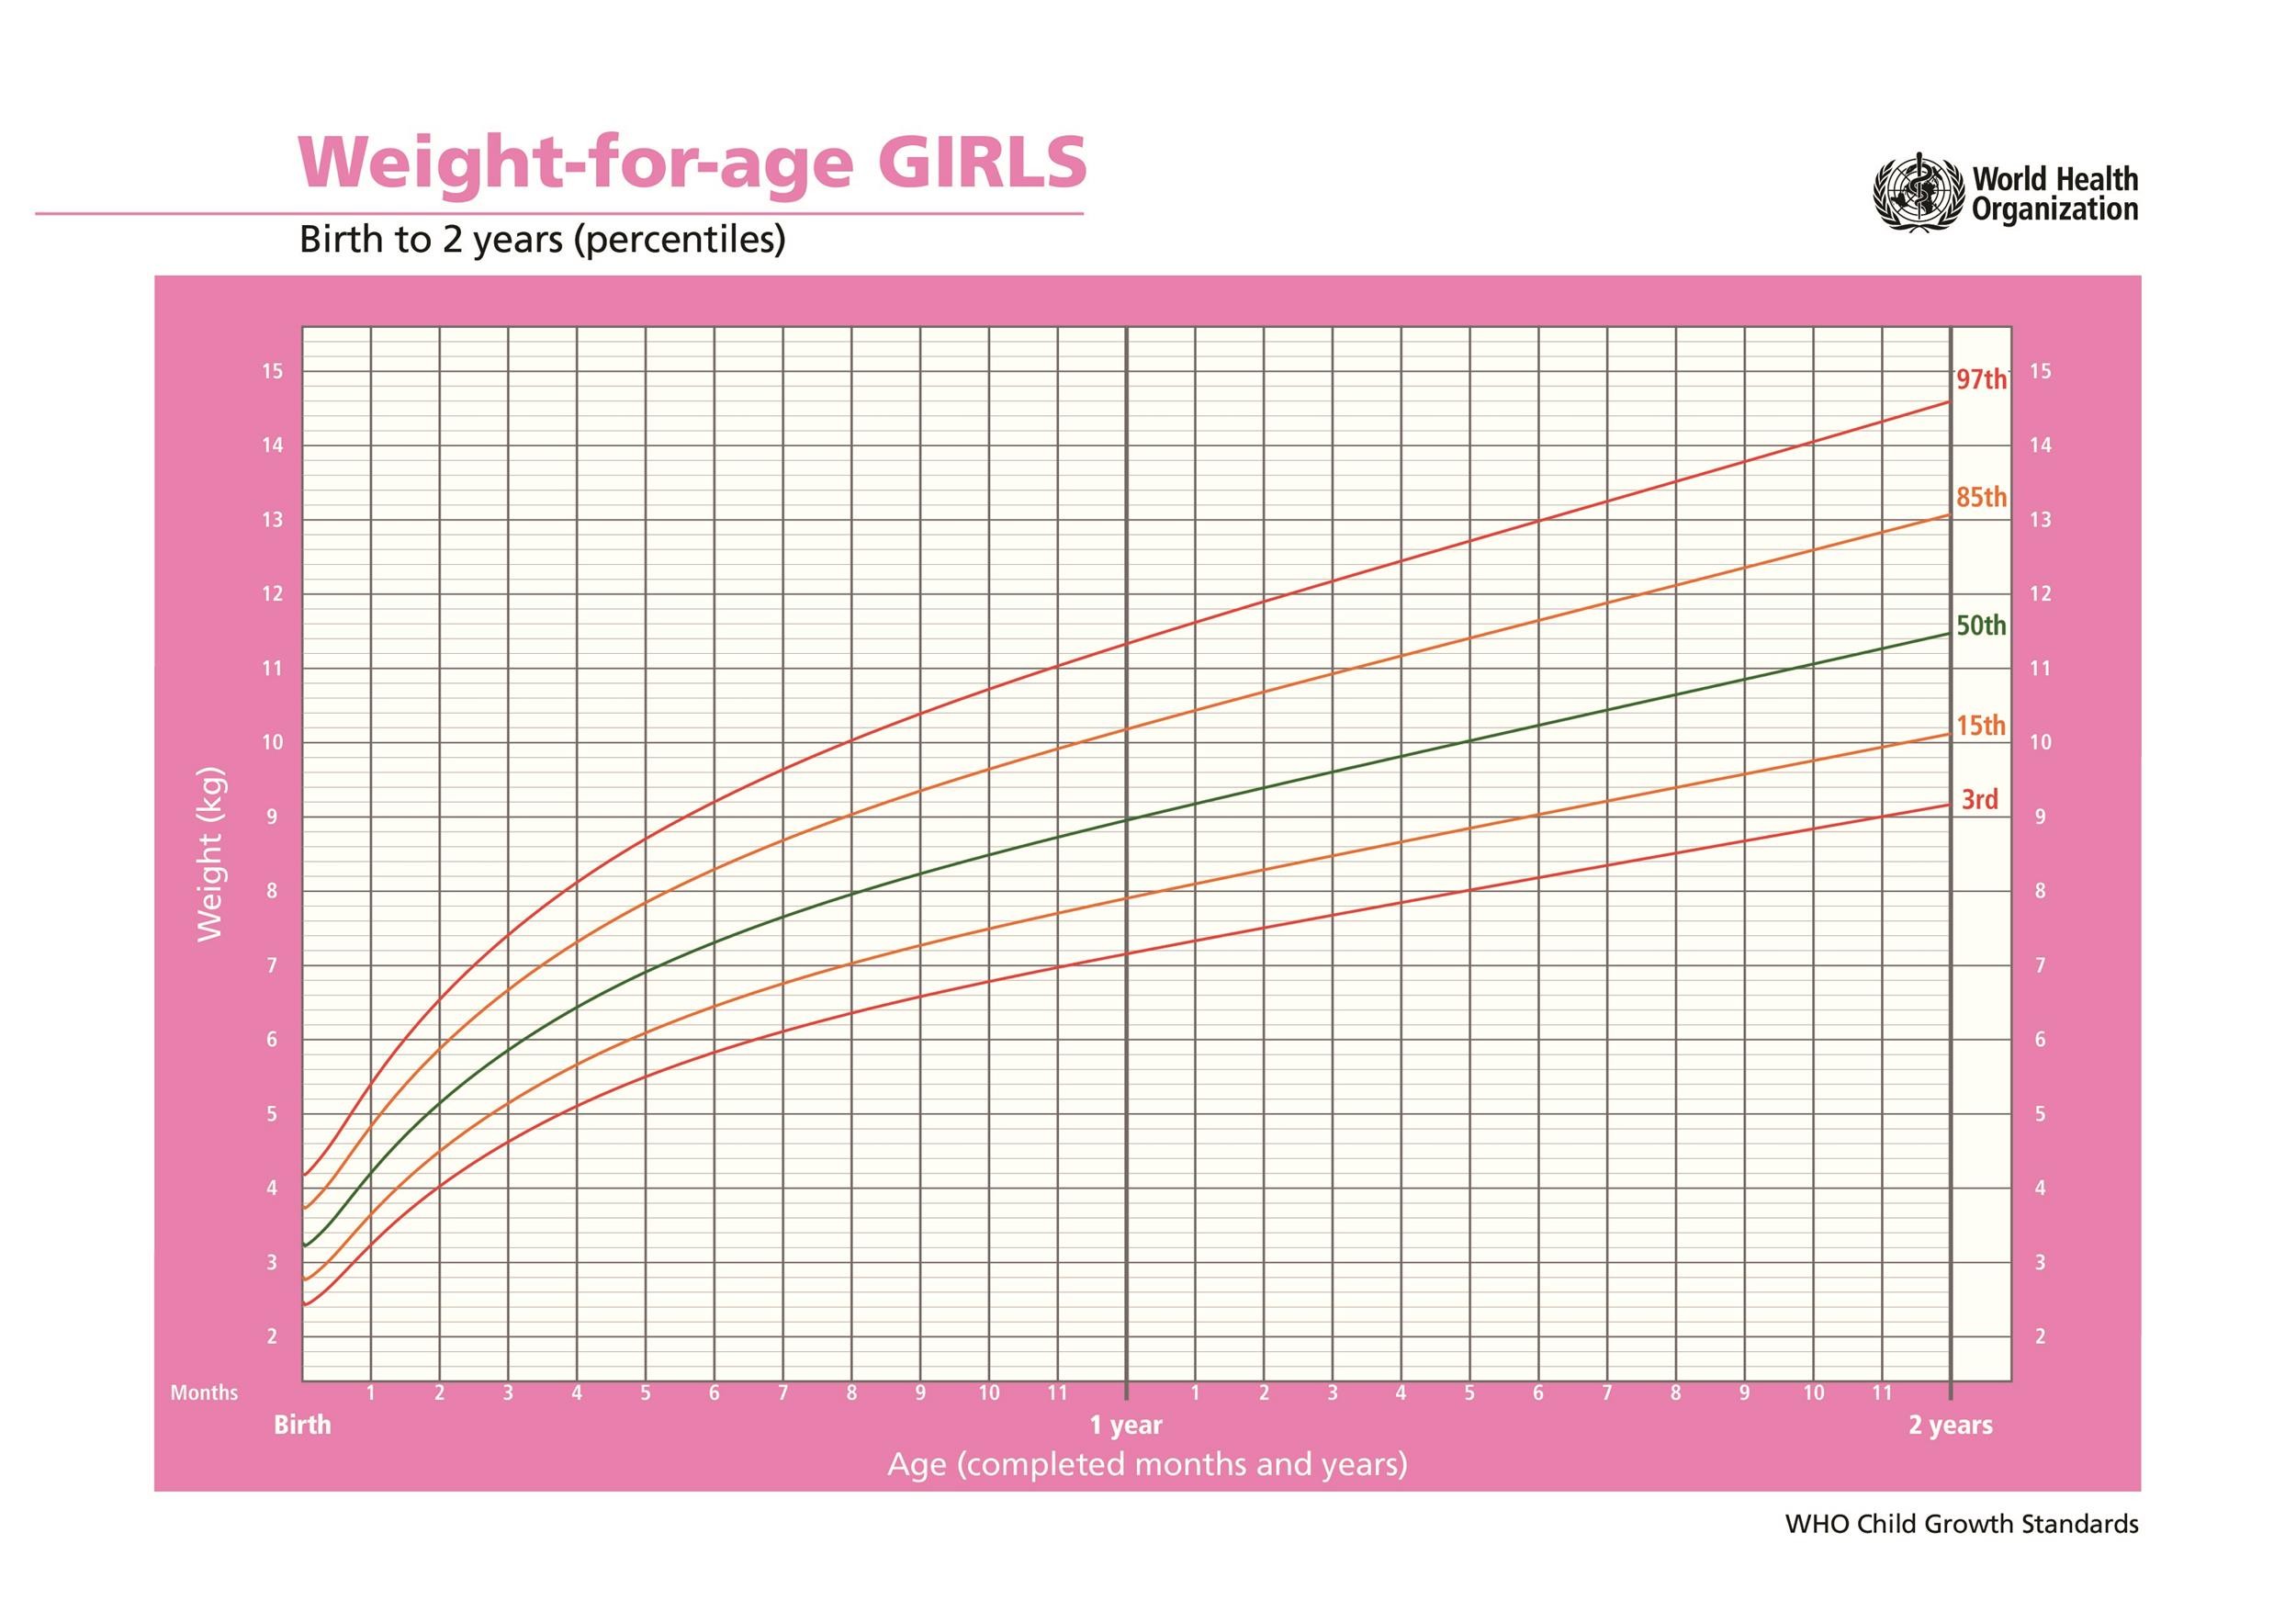 28 Weeks Baby Weight In Kg Chart